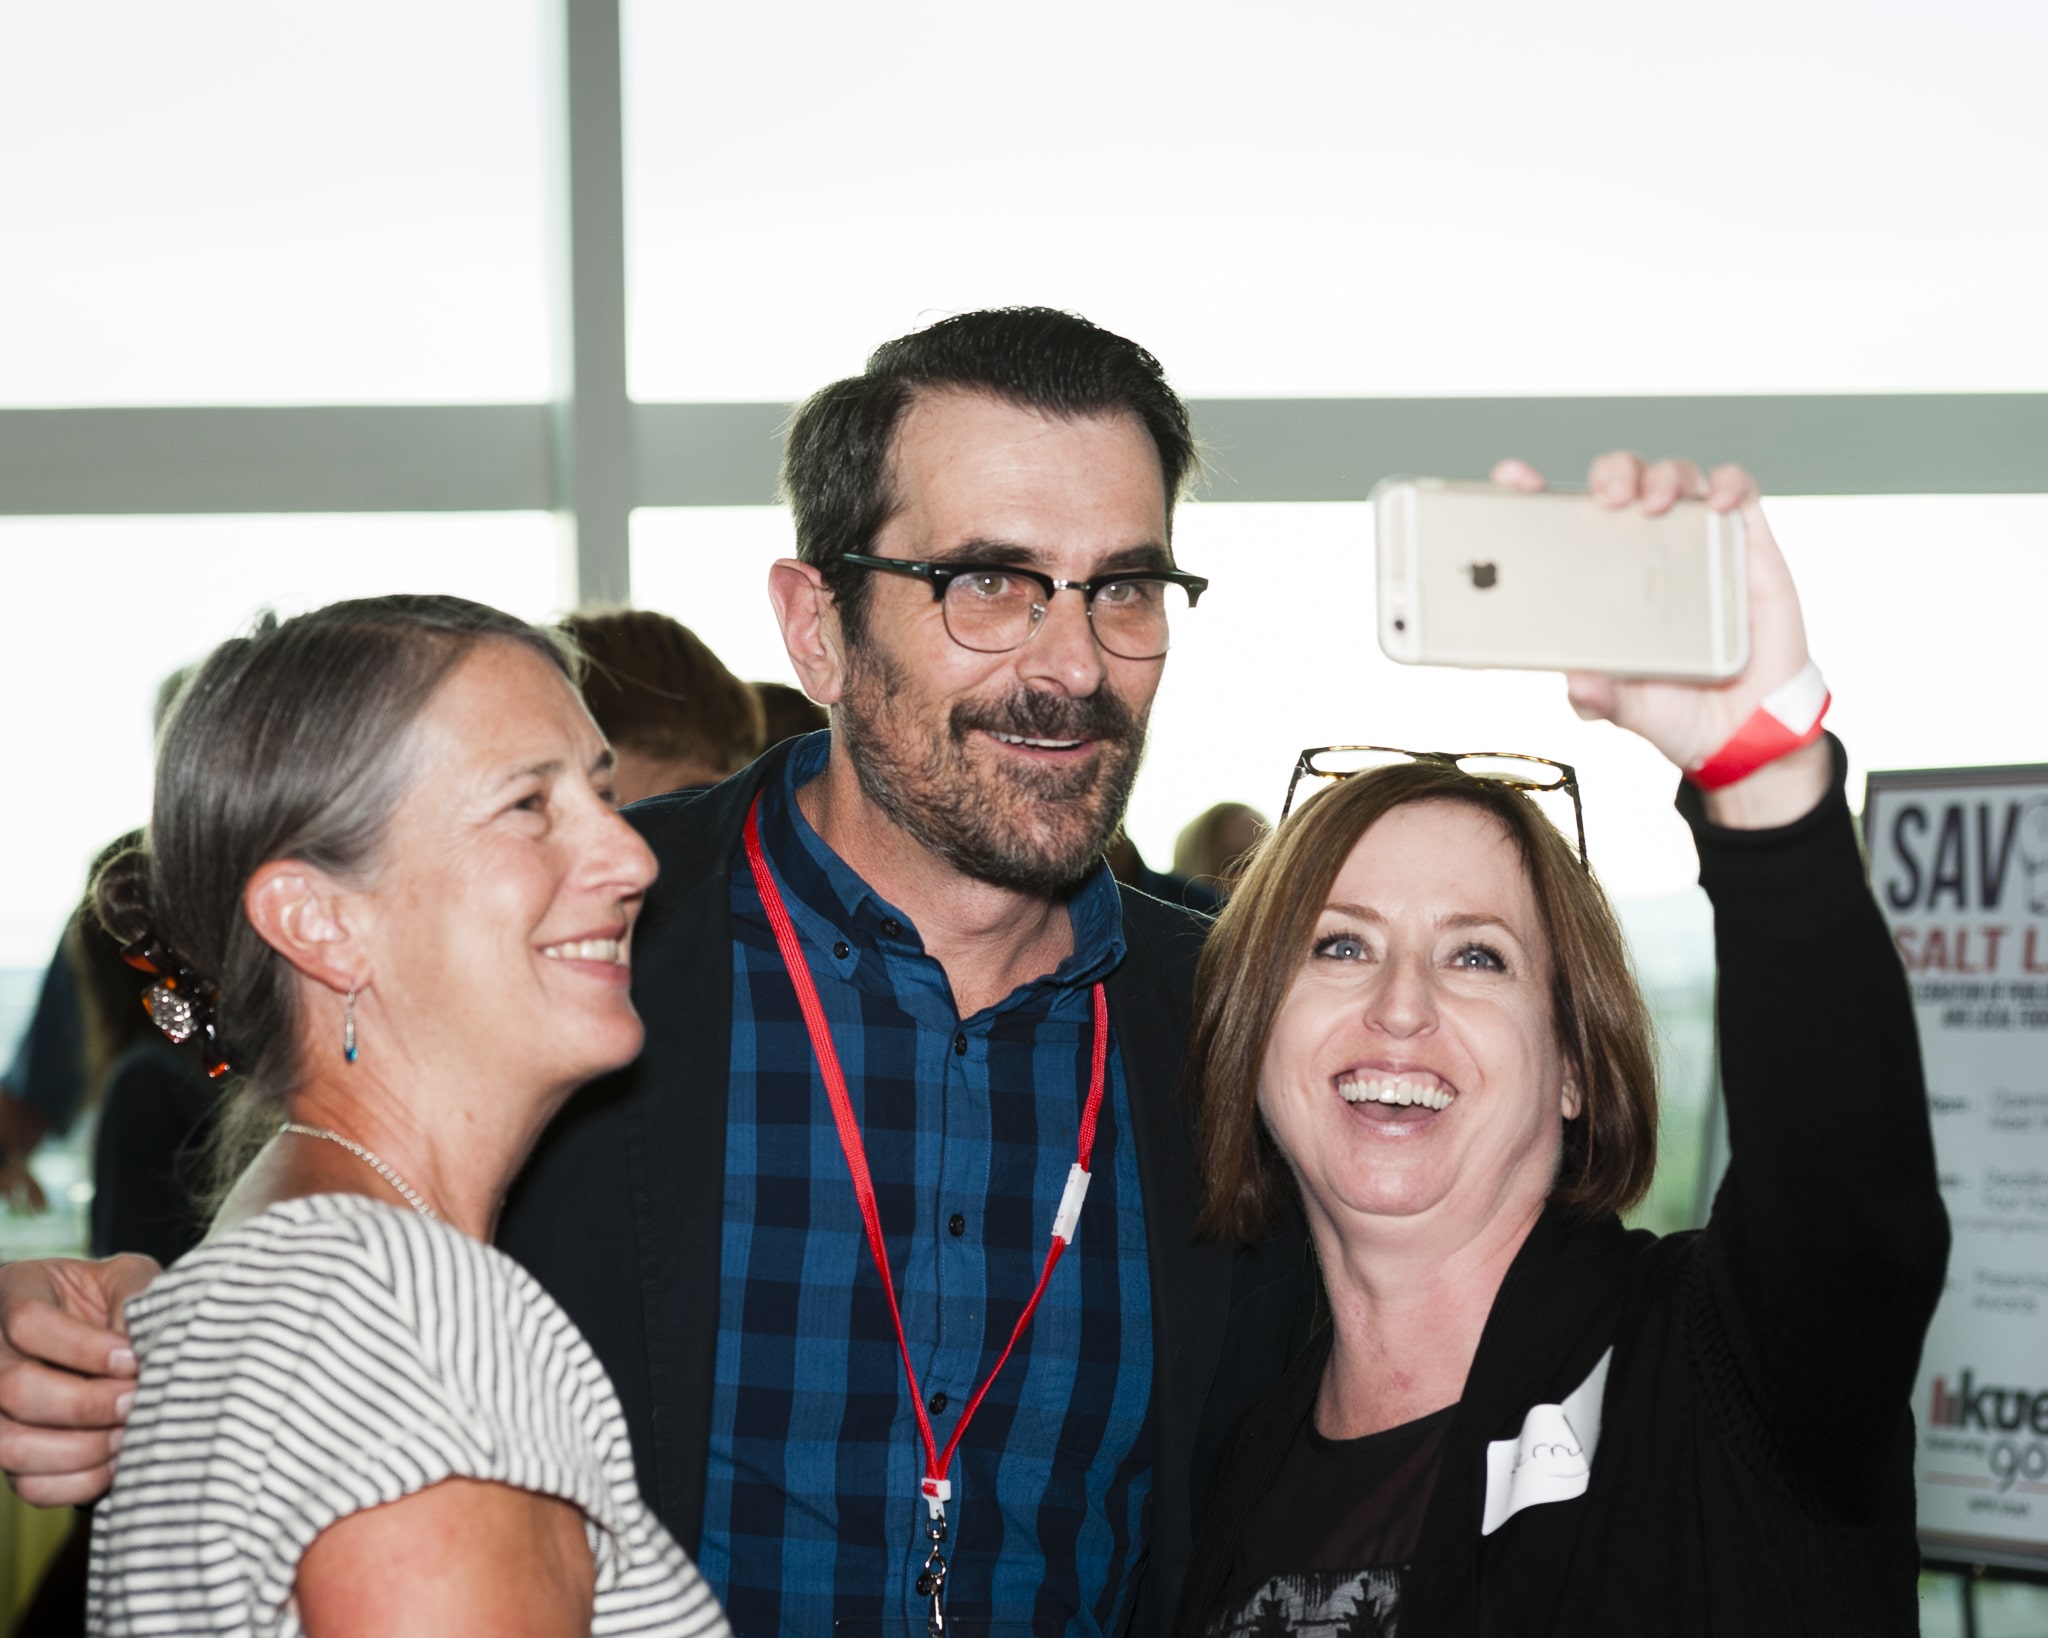 Two women pose with Modern Family starTy Burrell at the KUER Savory Salt Lake fundraiser.